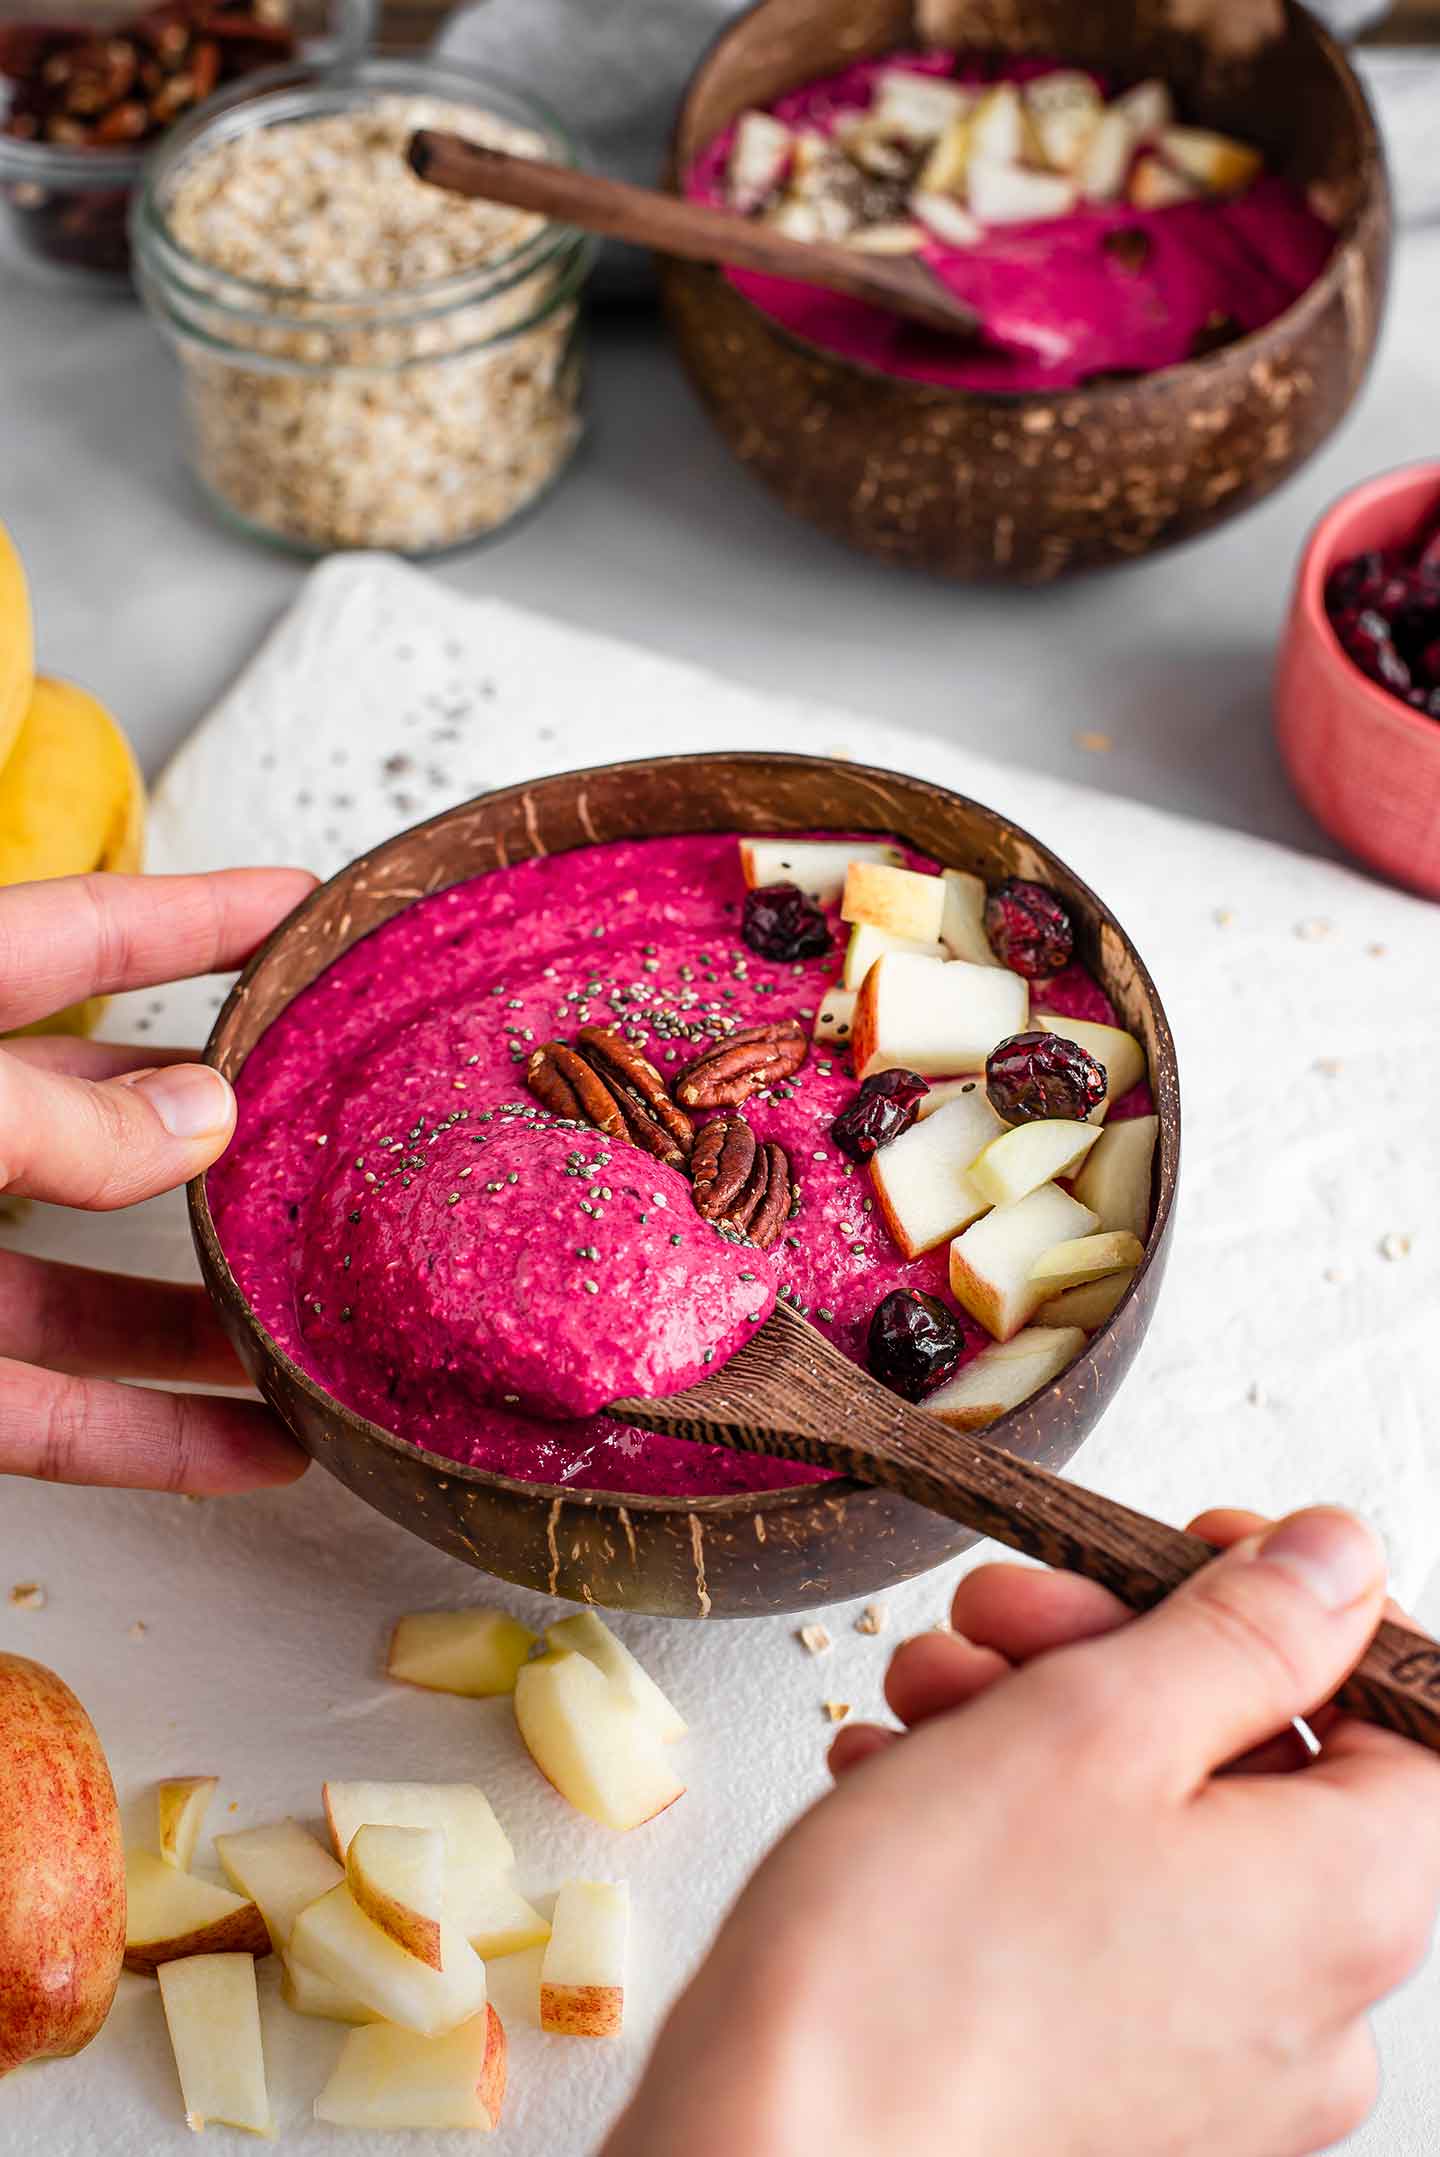 Side view of a hand using a wooden spoon to scoop the hot pink apple beet smoothie from the bowl. Another smoothie, oats, diced apple, cranberries, and toasted pecans are in the background.